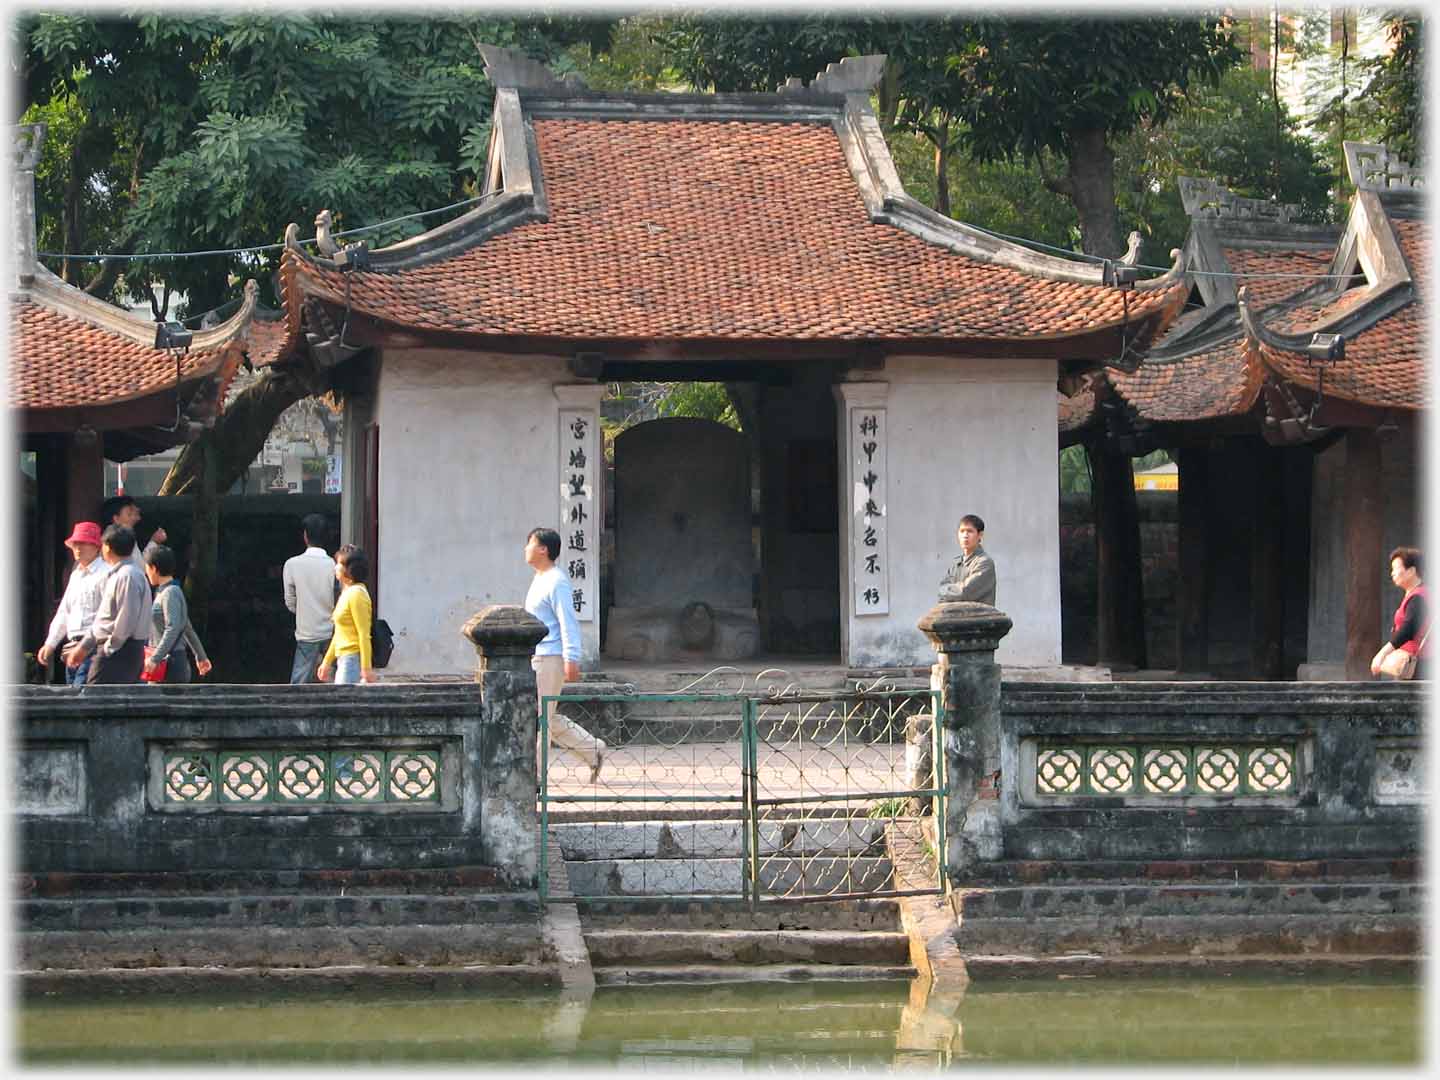 Small pavilion, open entrance with vertical set of characters on each side.